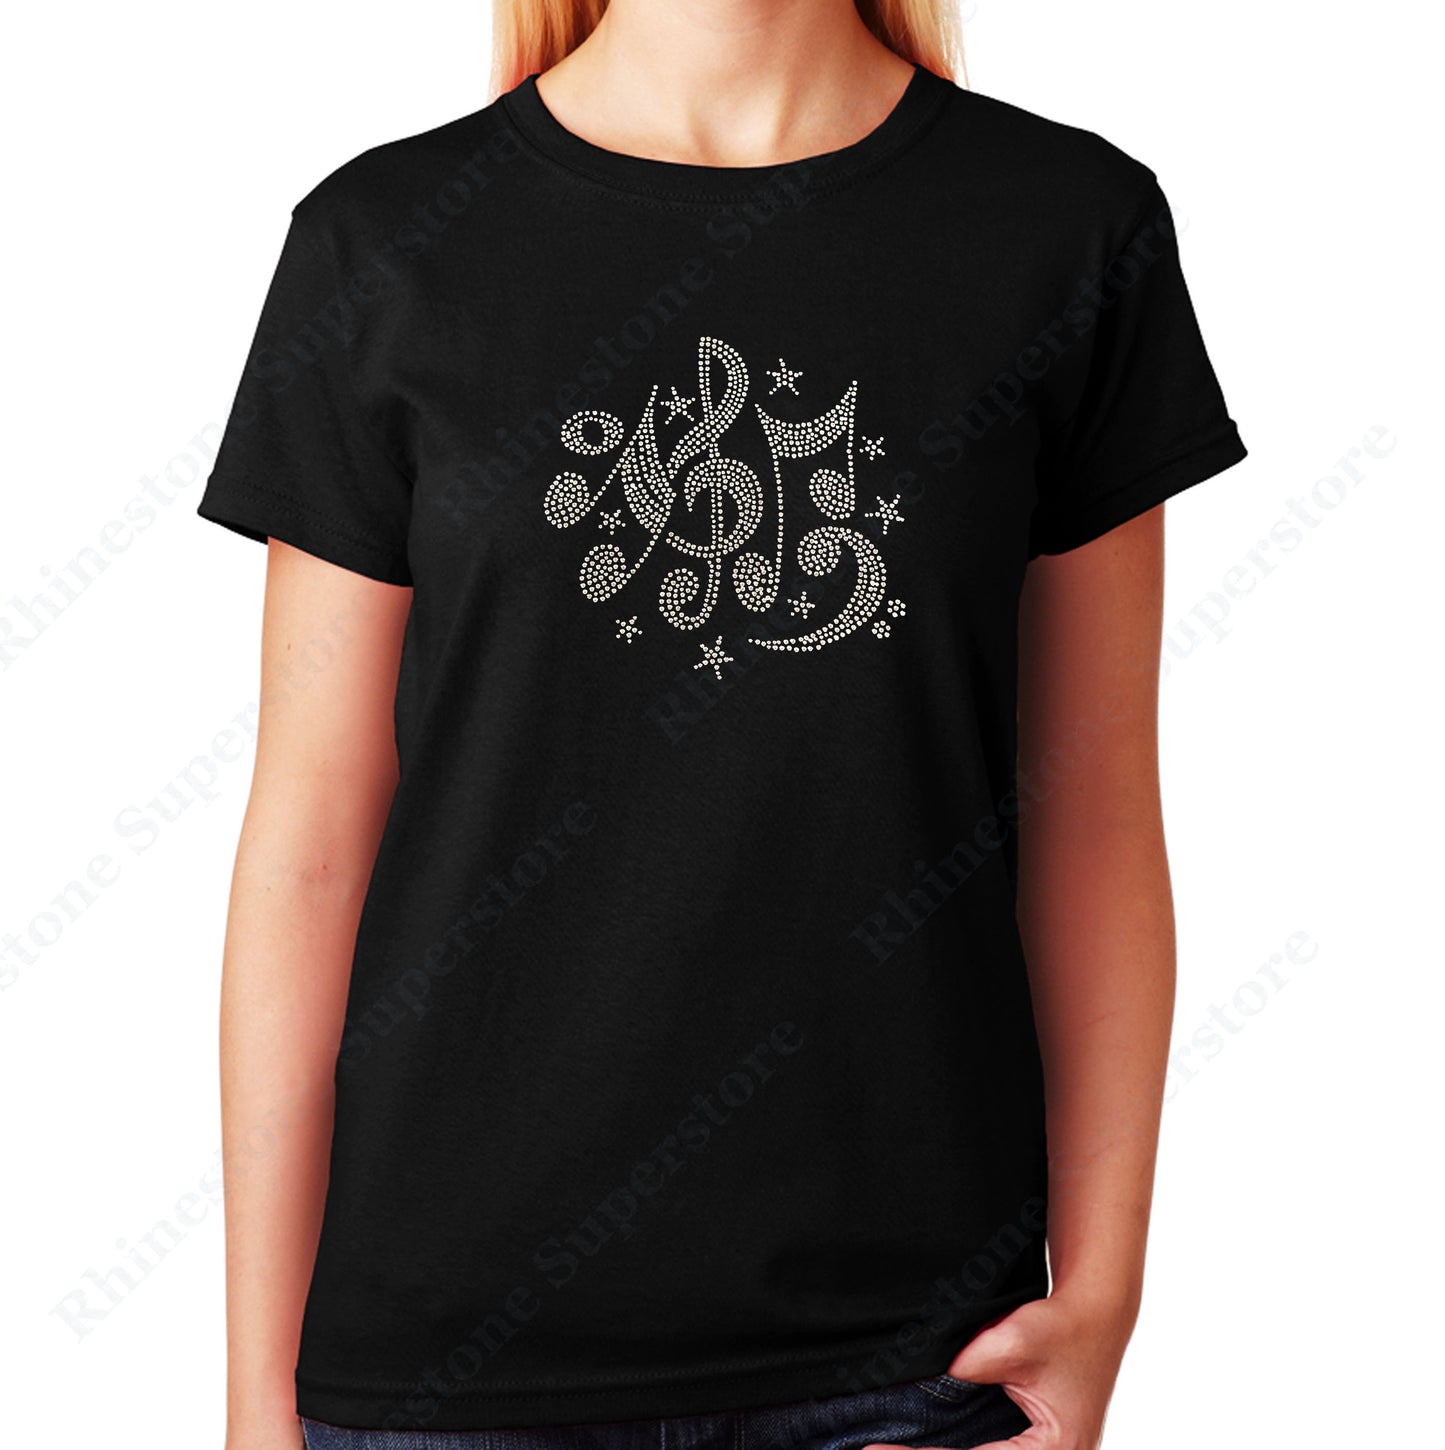 Women's / Unisex T-Shirt with Music Notes and Stars in Rhinestones